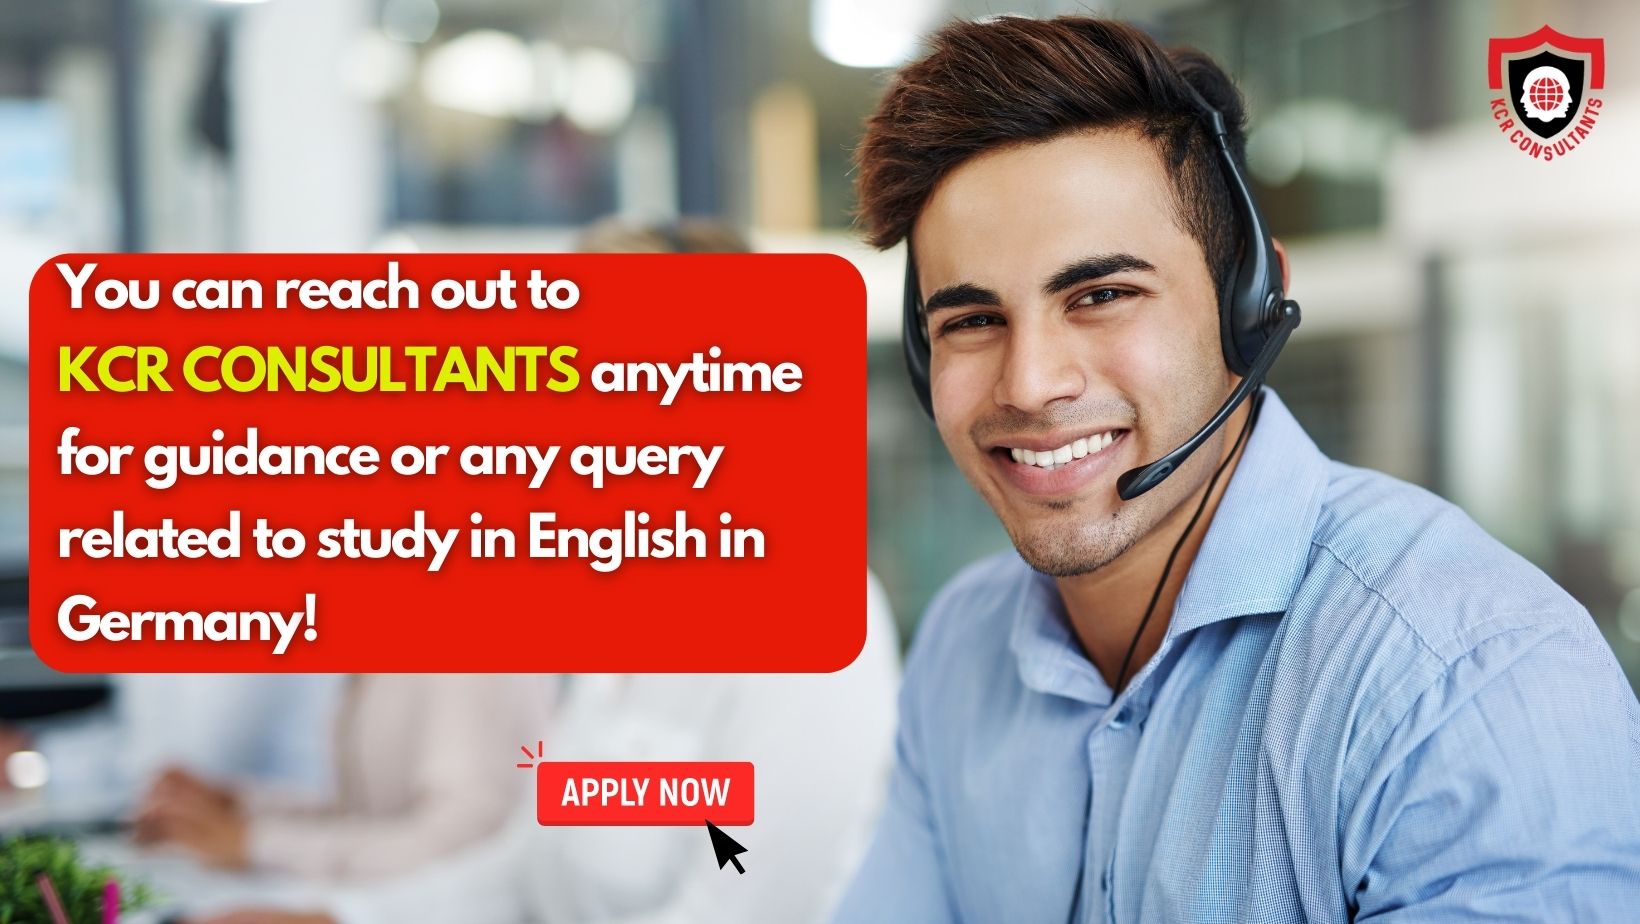 Study in English in Germany - KCR CONSULTANTS